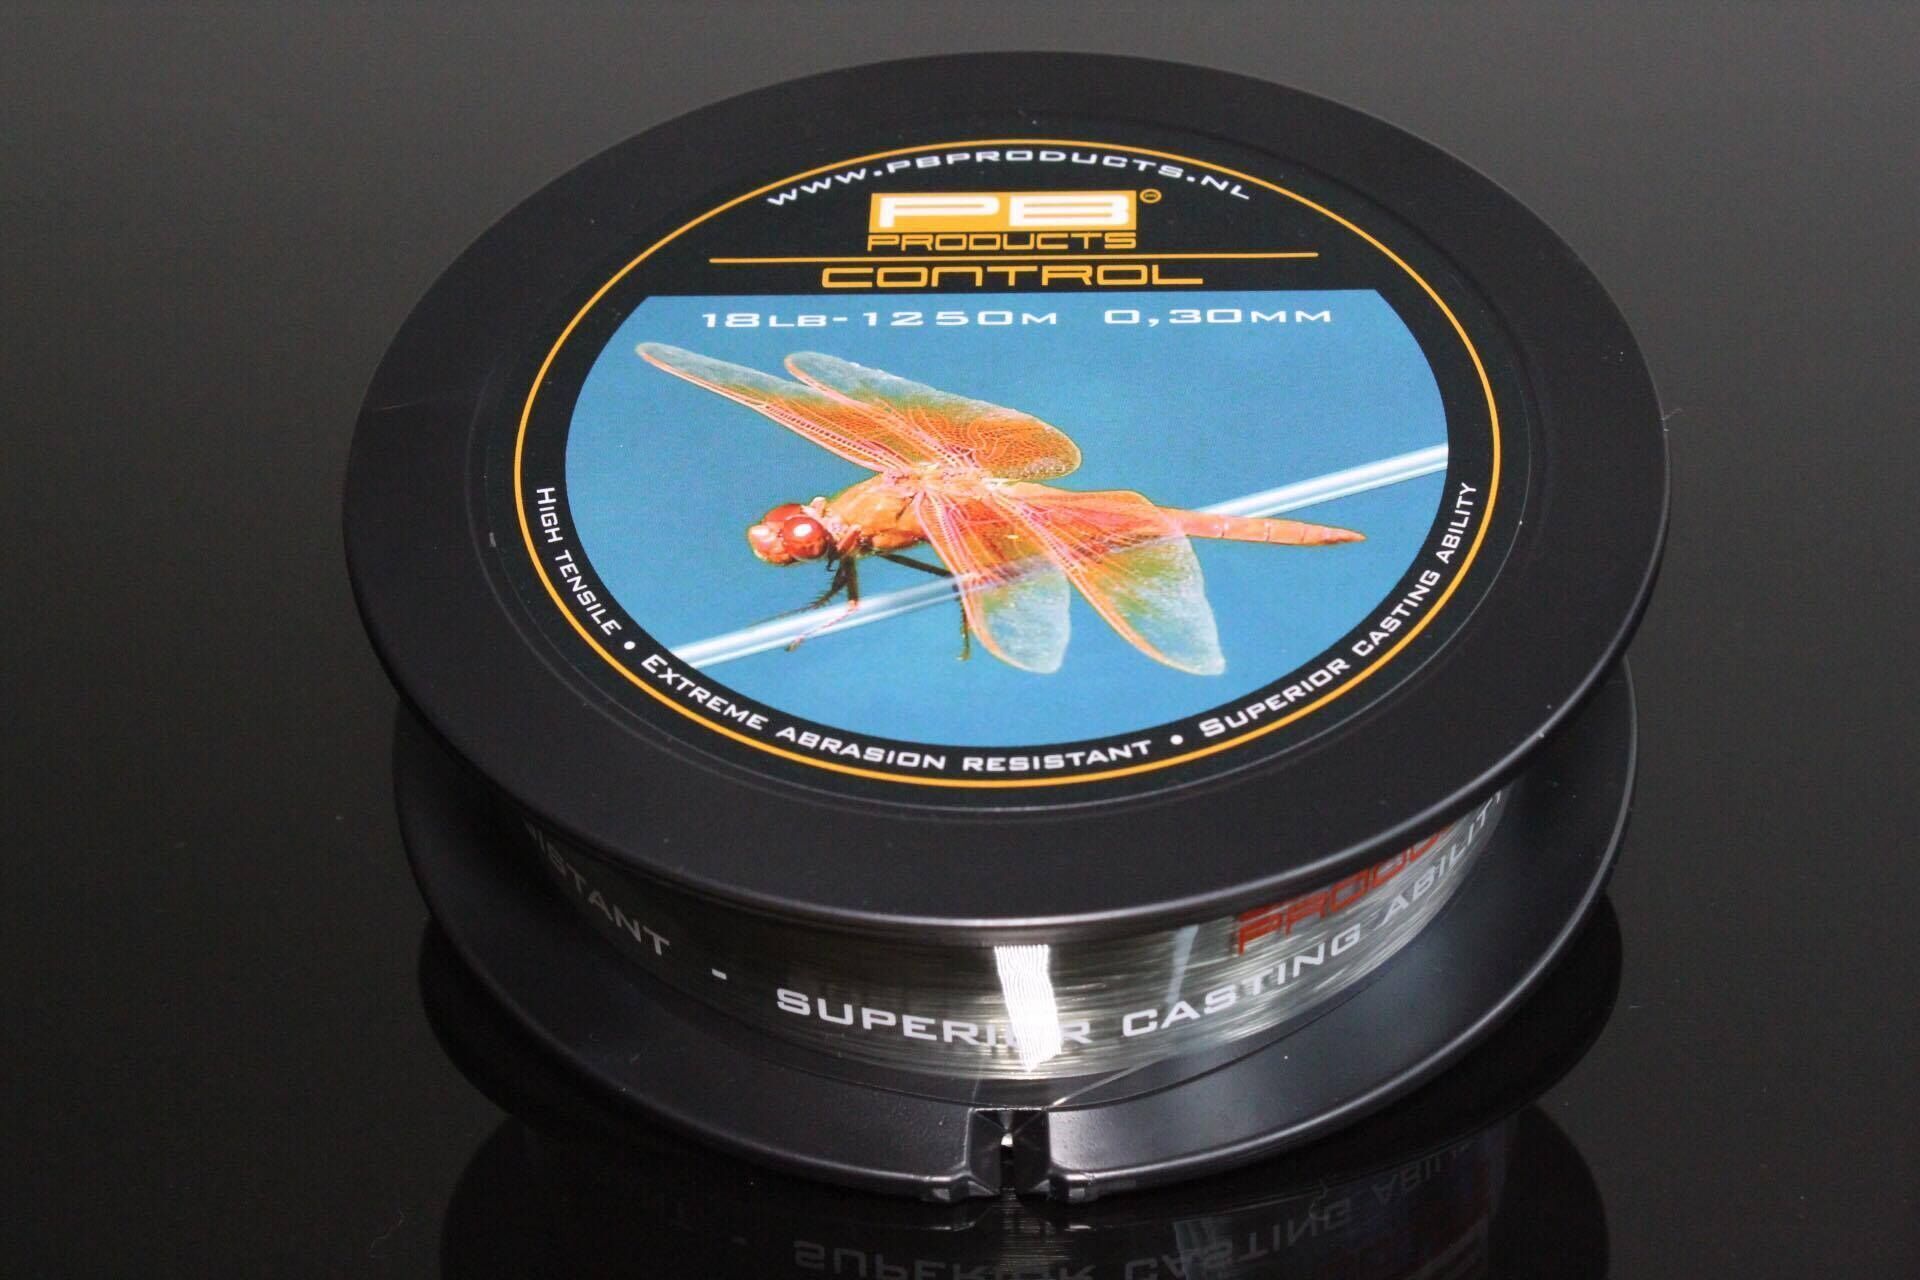 PB products control monofilament in 18lb carp fishing line brand new RRP £25 